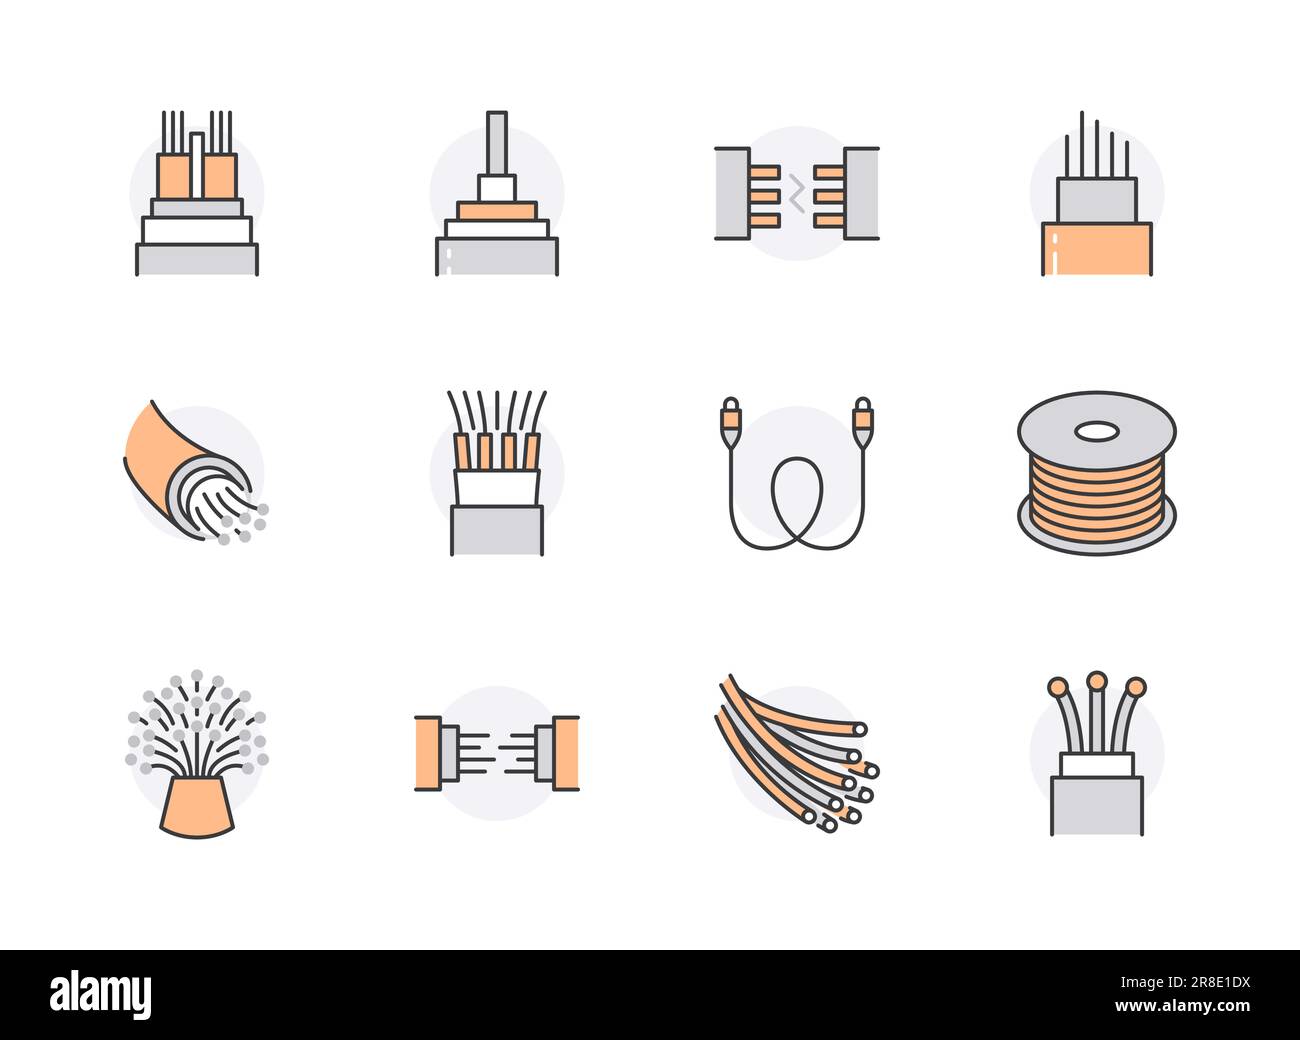 Optical fiber flat line icons. Network connection, computer wire, cable bobbin, data transfer. Thin signs for electronics store, internet services Stock Vector